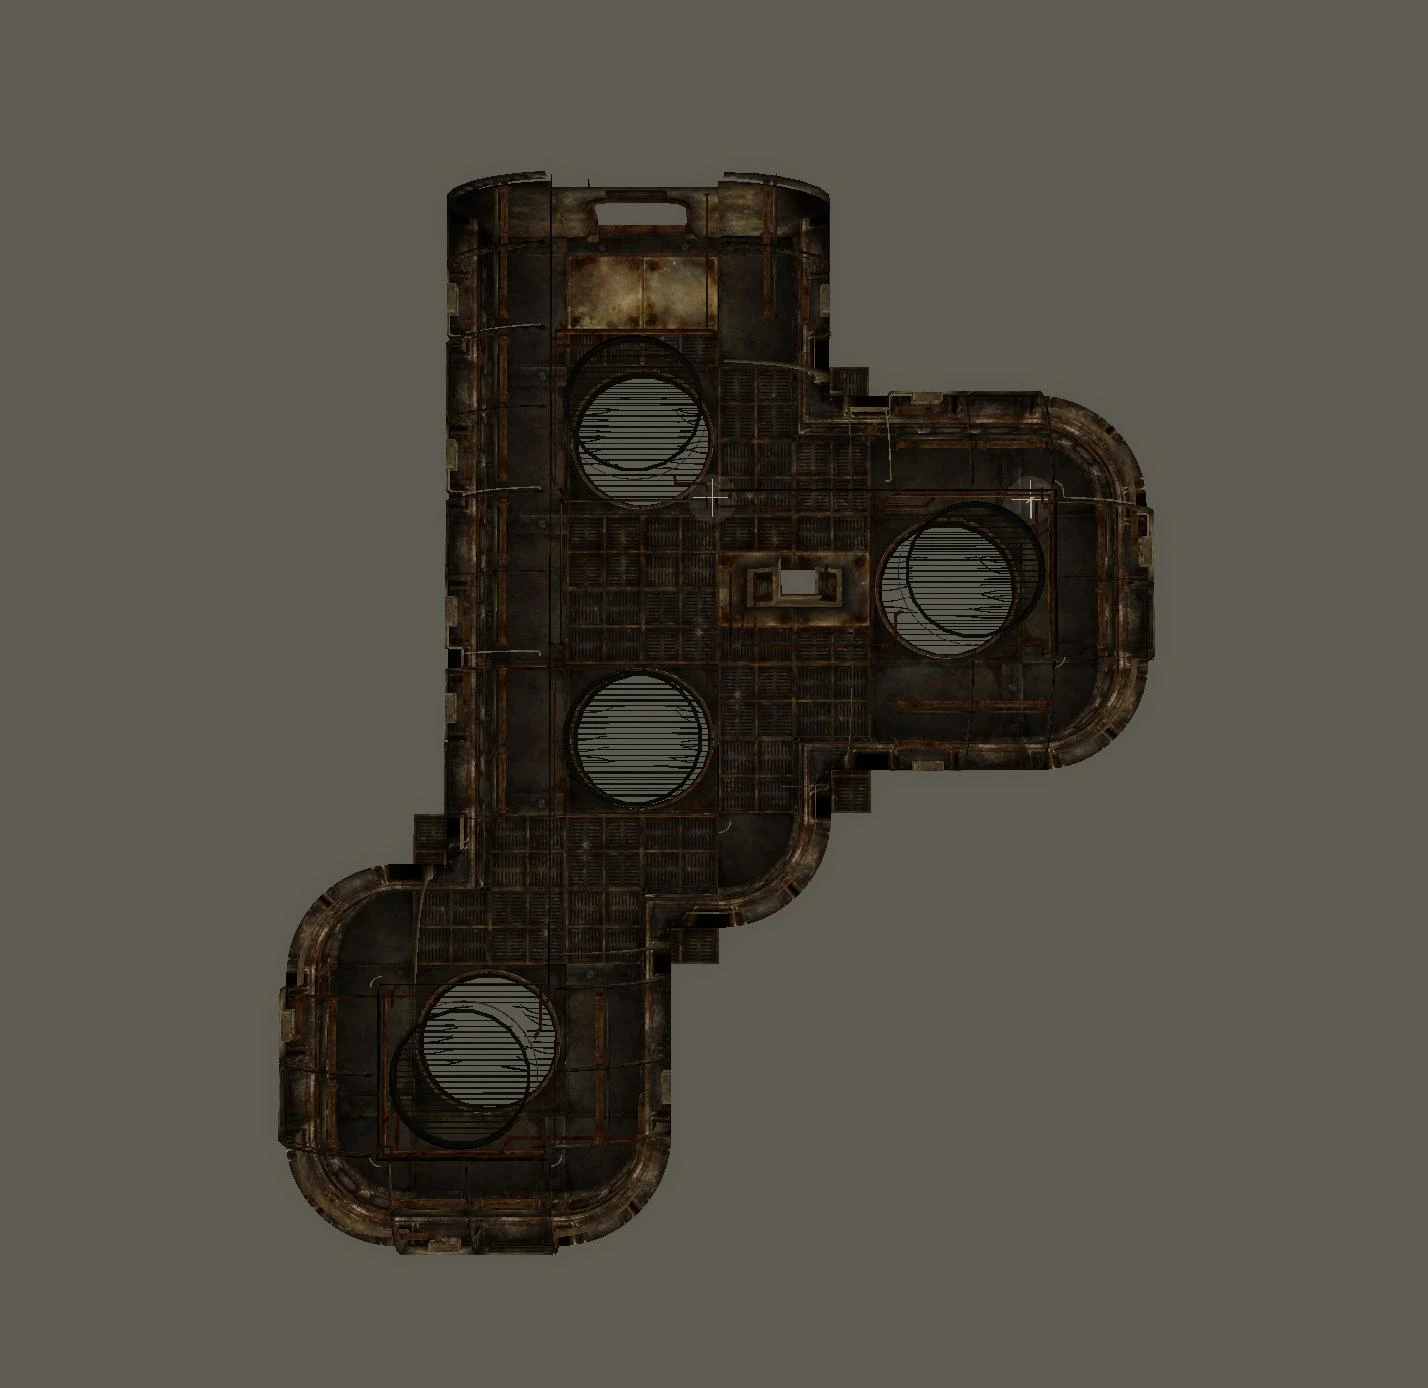 Vault FEV Chamber Expanded Tileset at Fallout 3 Nexus - Mods and community